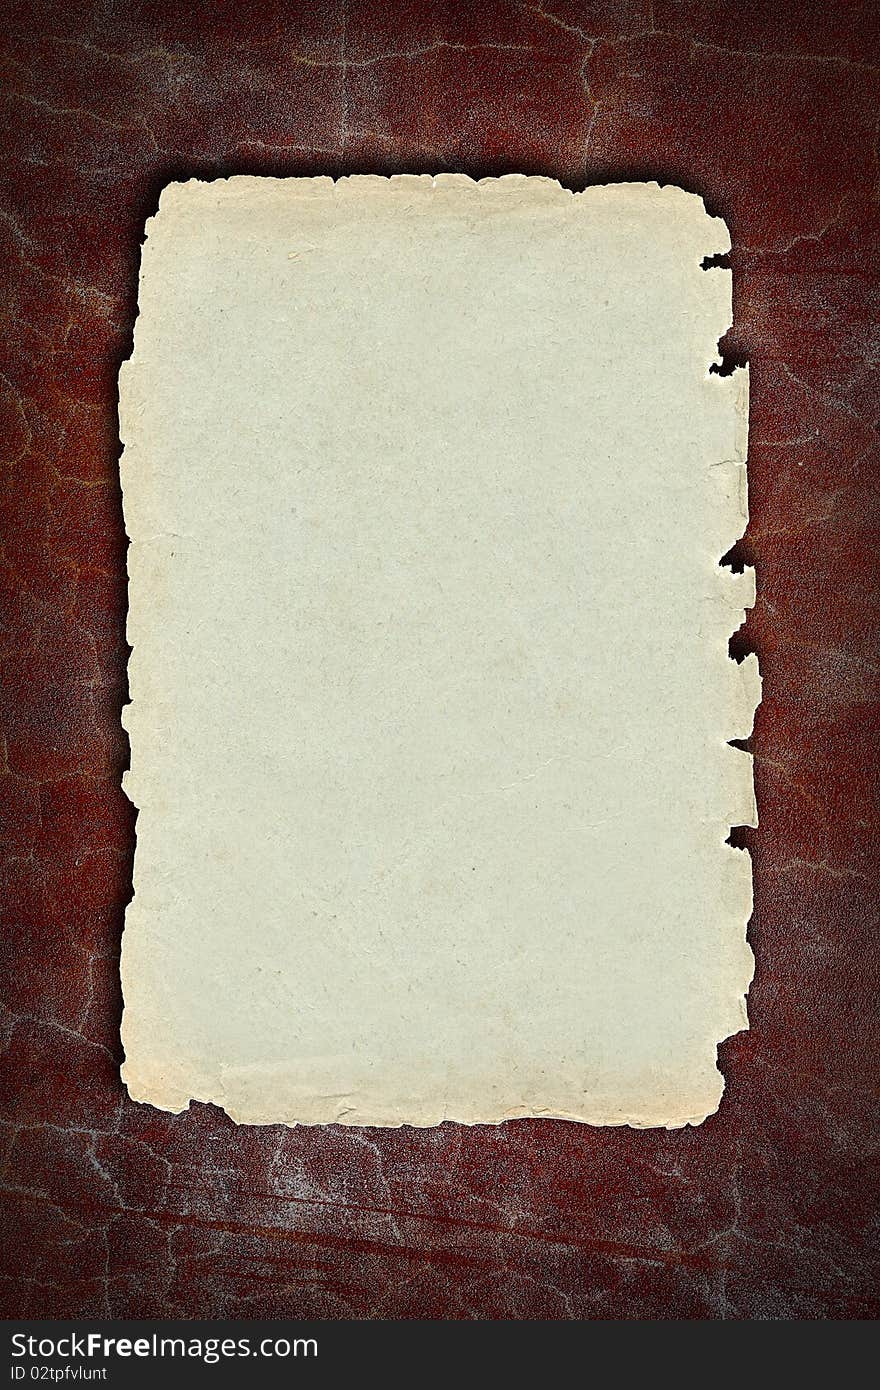 Vintage aged with worn edges light brown paper texture for background designs. Vintage aged with worn edges light brown paper texture for background designs